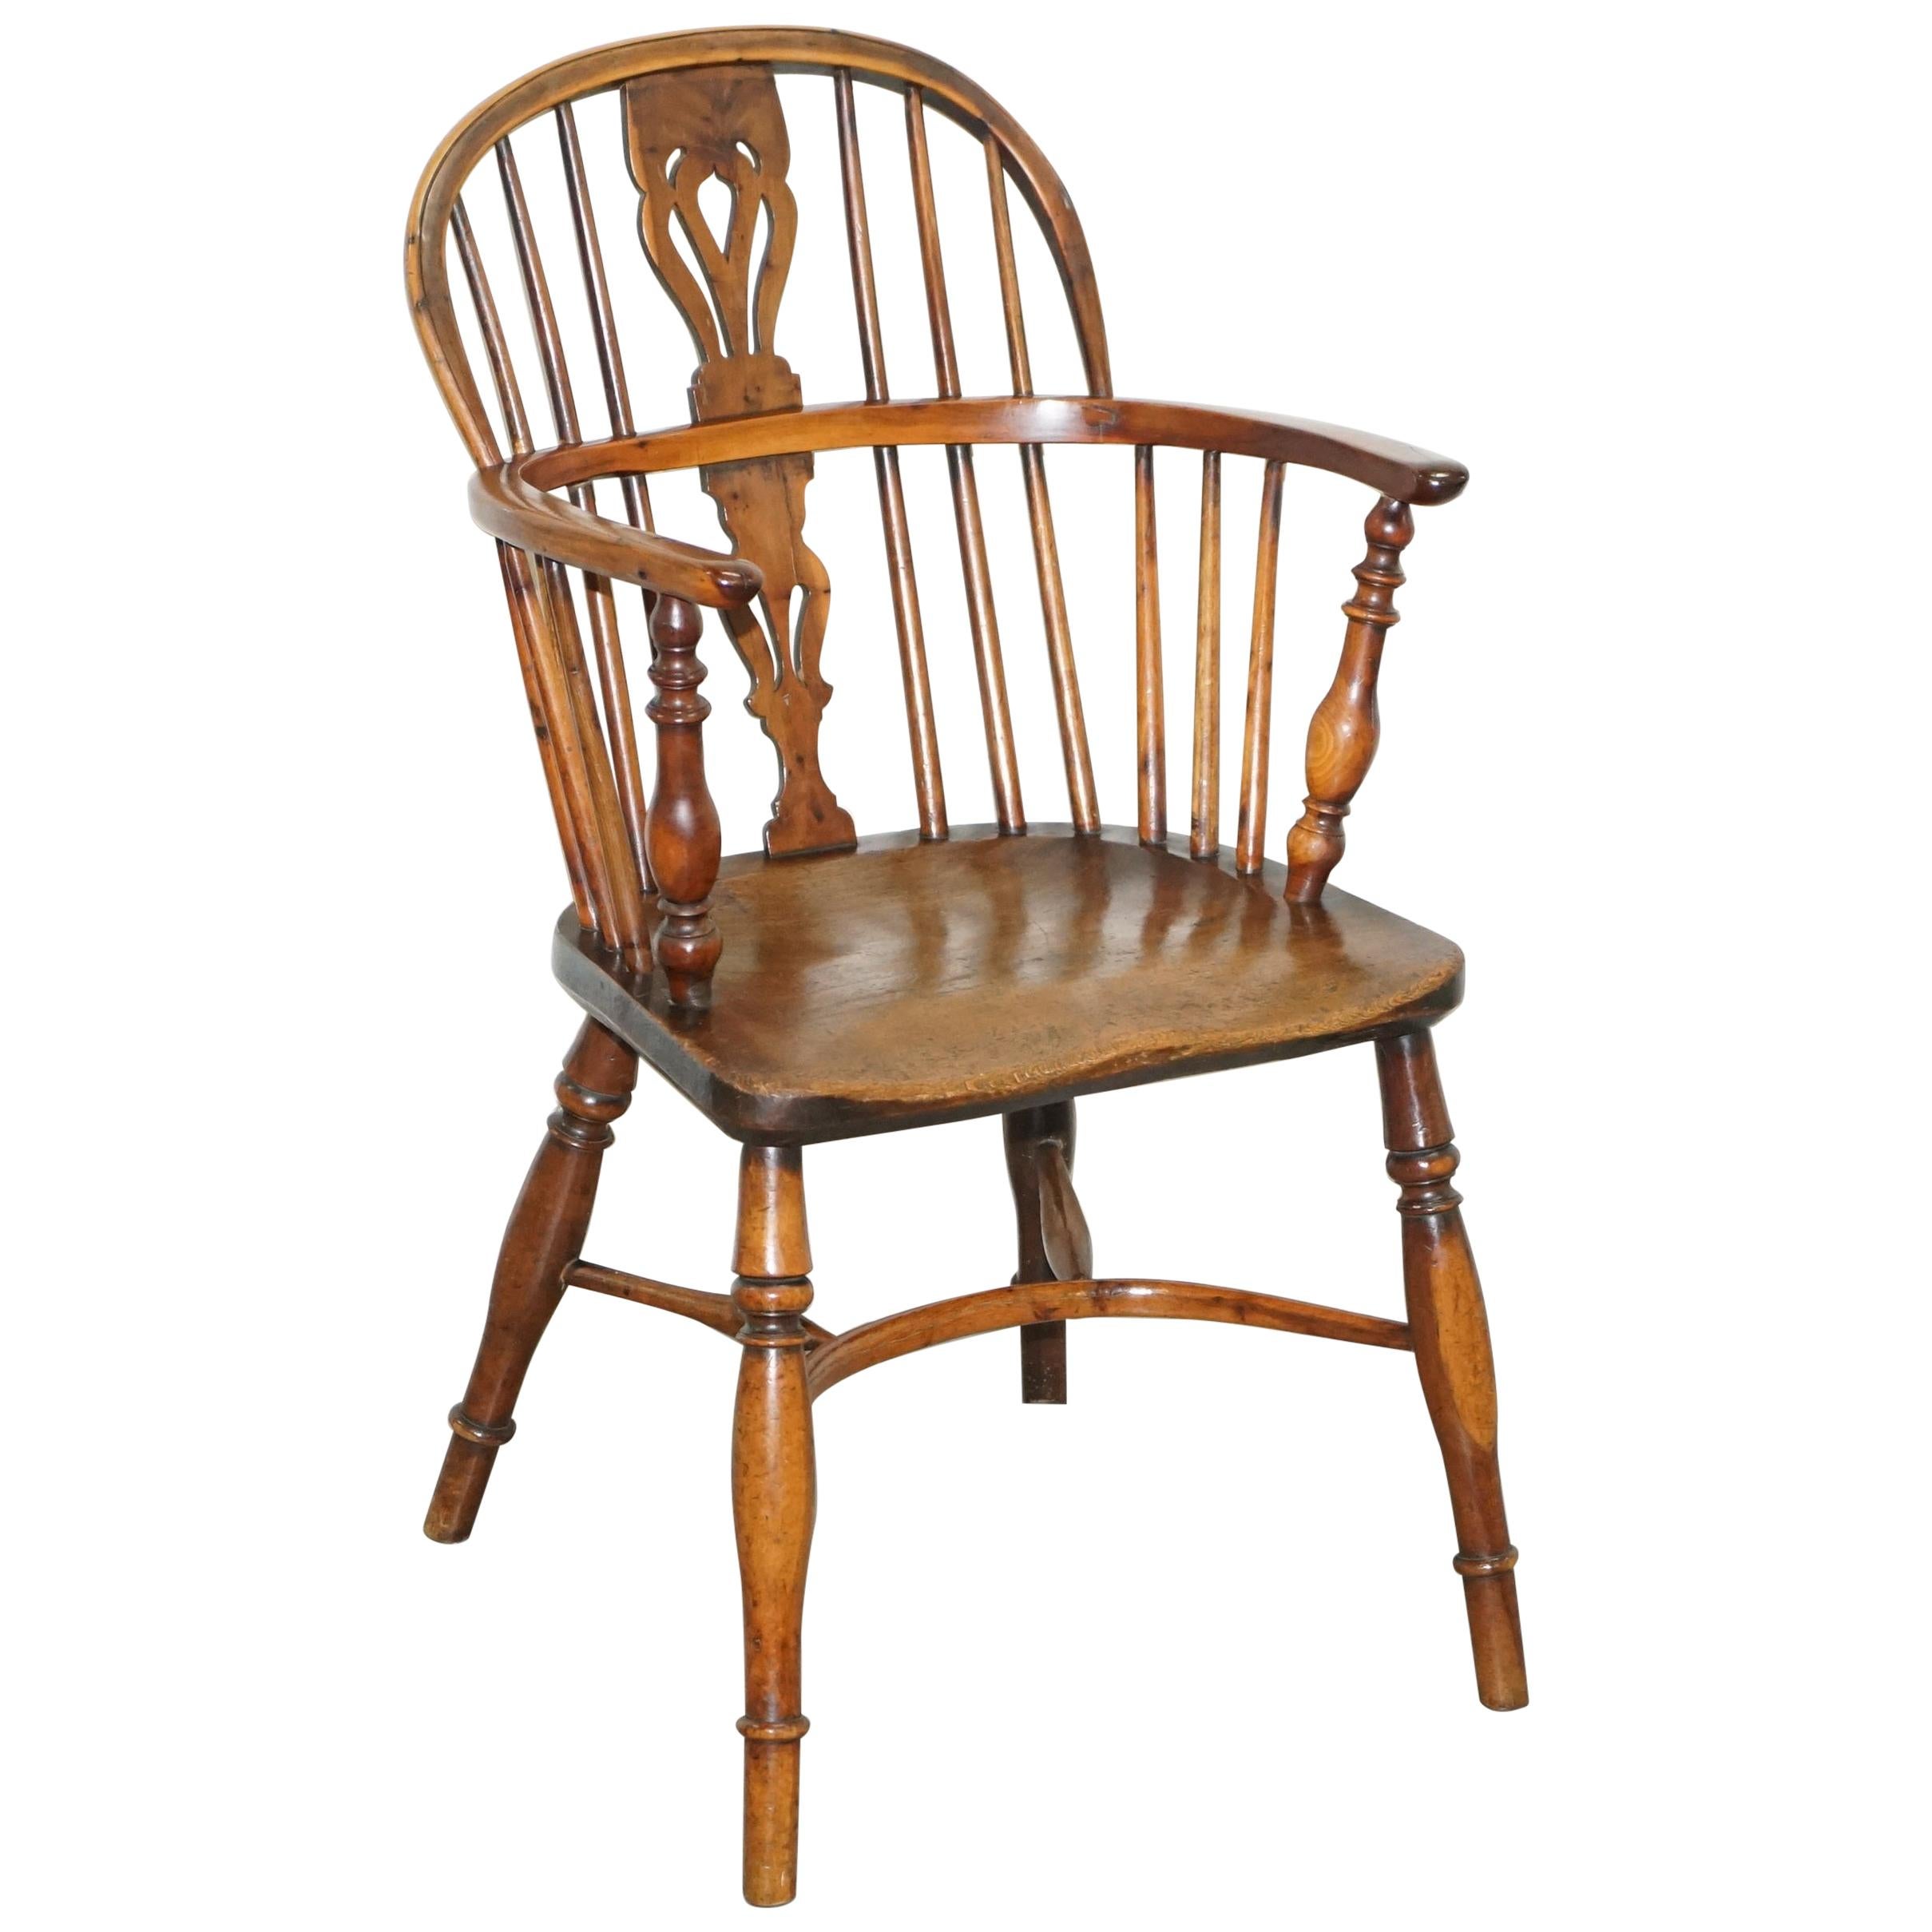 1 of 6 Burr Yew Wood Windsor Armchairs circa 1860 English Countryhouse Furniture For Sale